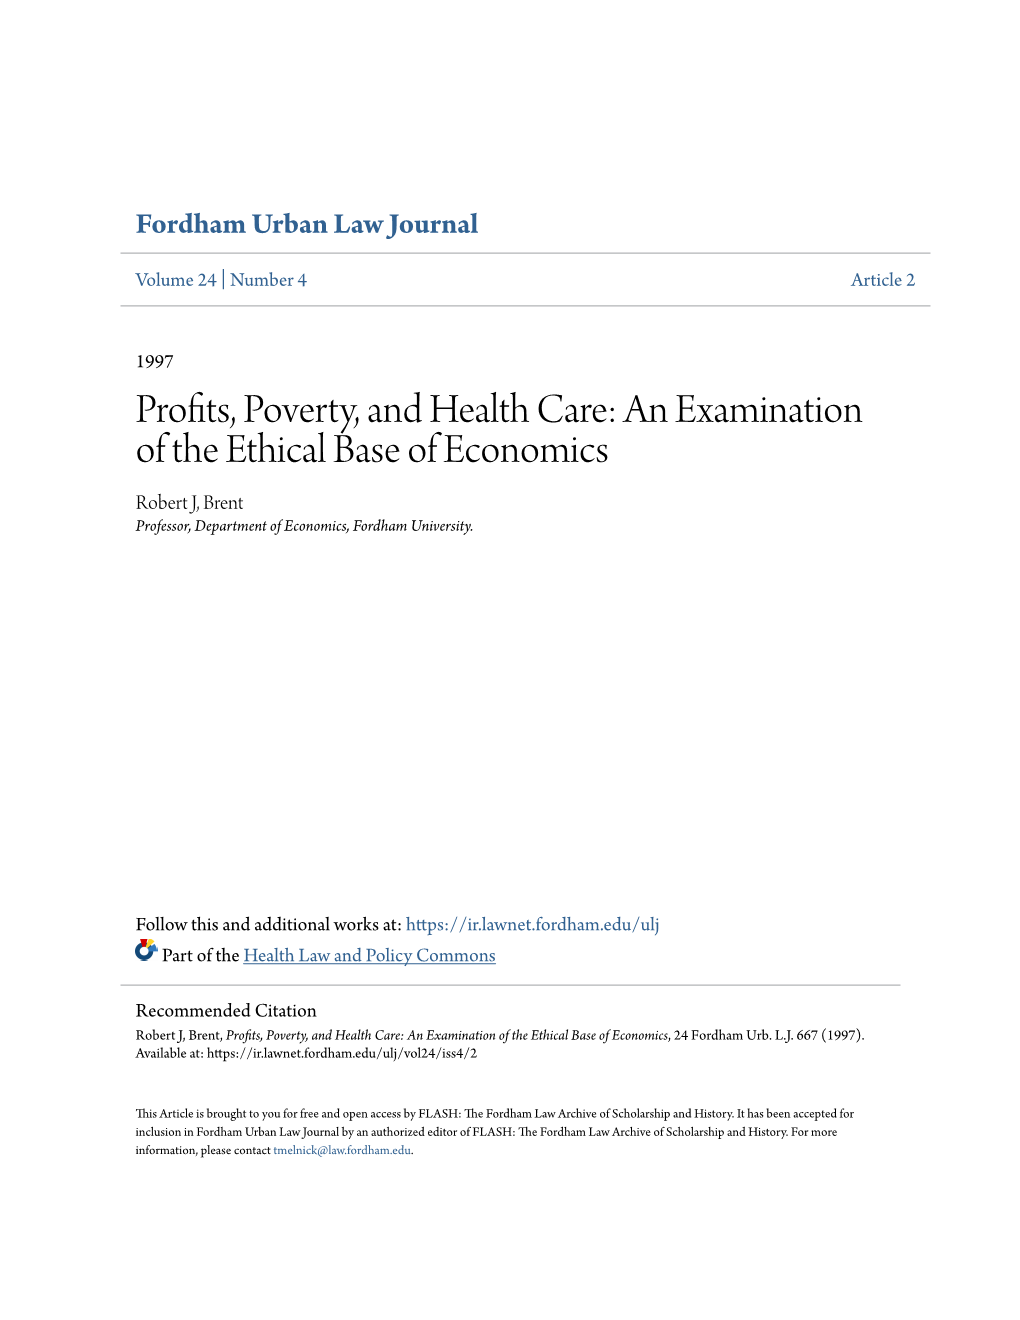 Profits, Poverty, and Health Care: an Examination of the Ethical Base of Economics Robert J, Brent Professor, Department of Economics, Fordham University